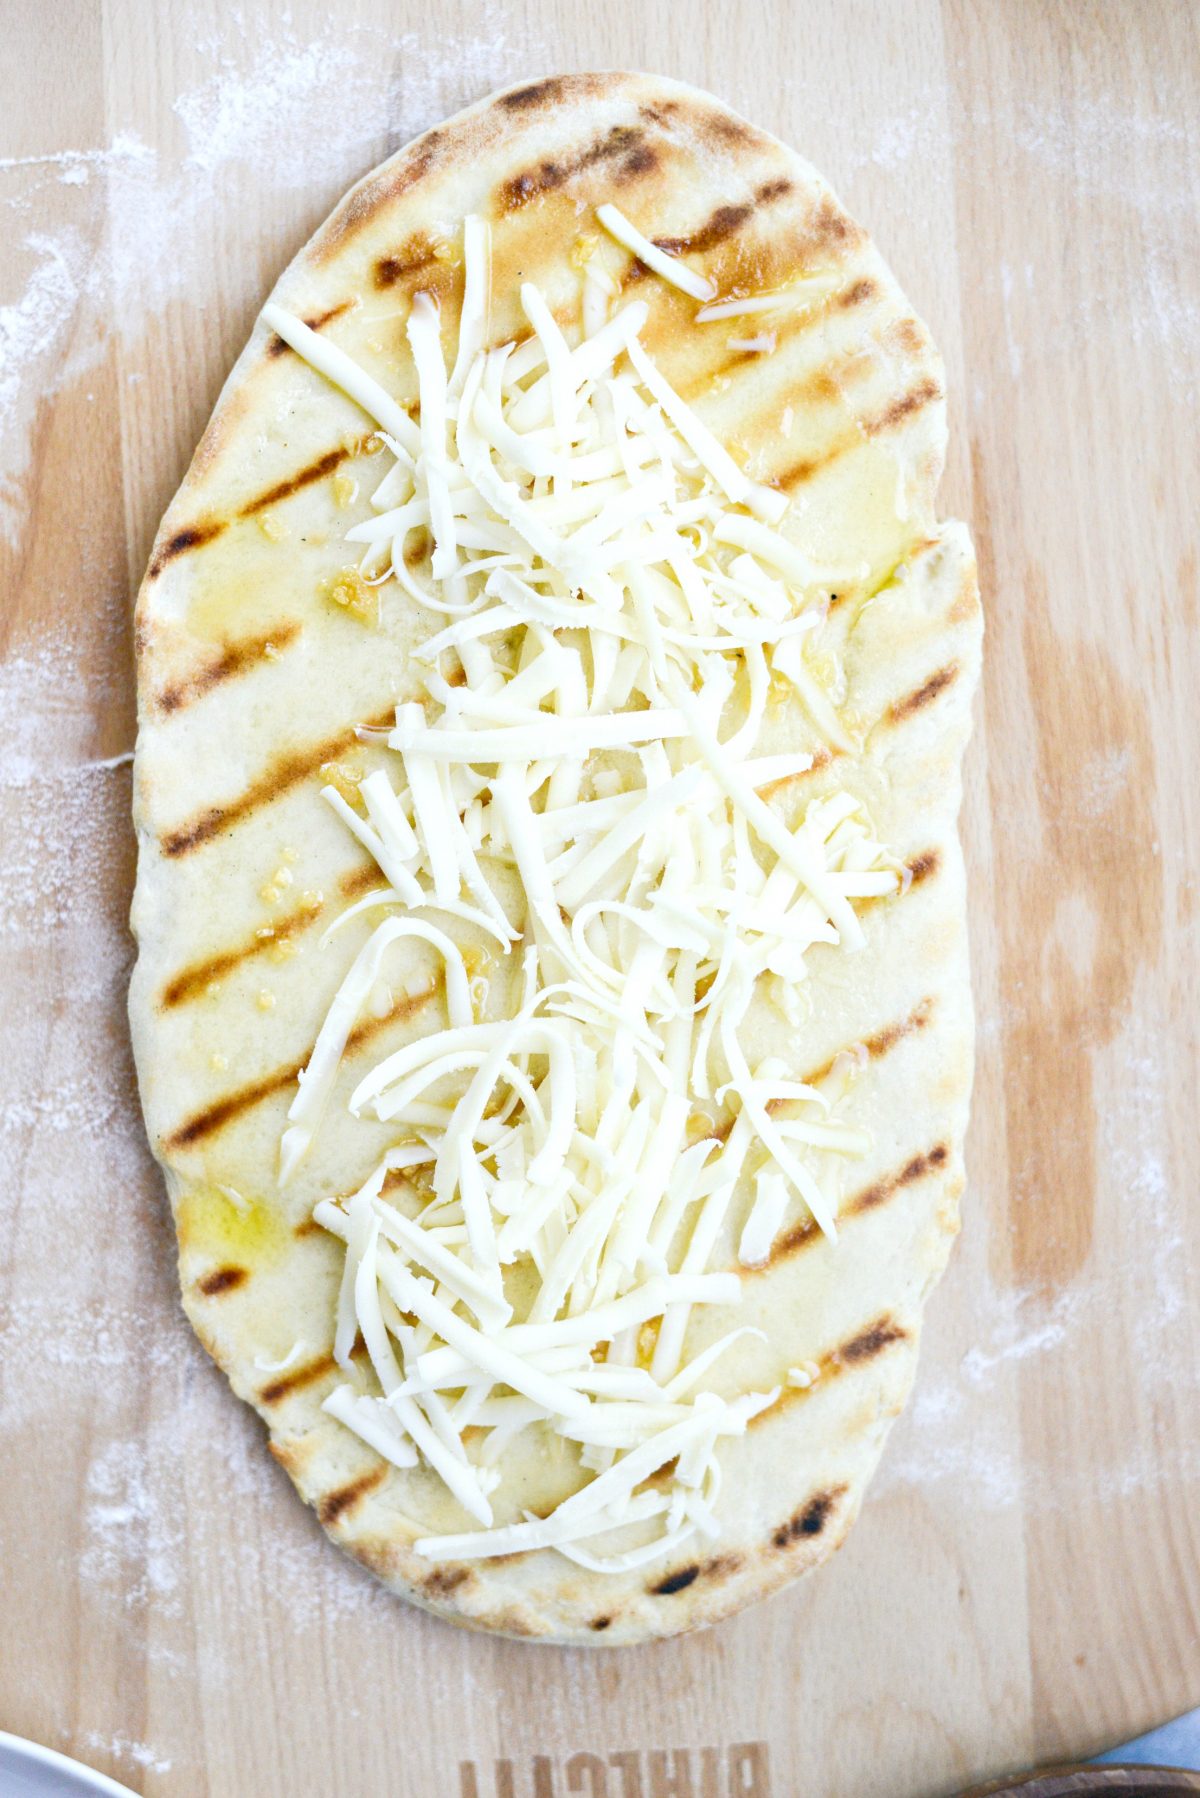 grilled pizza dough topped with garlic oil and cheese